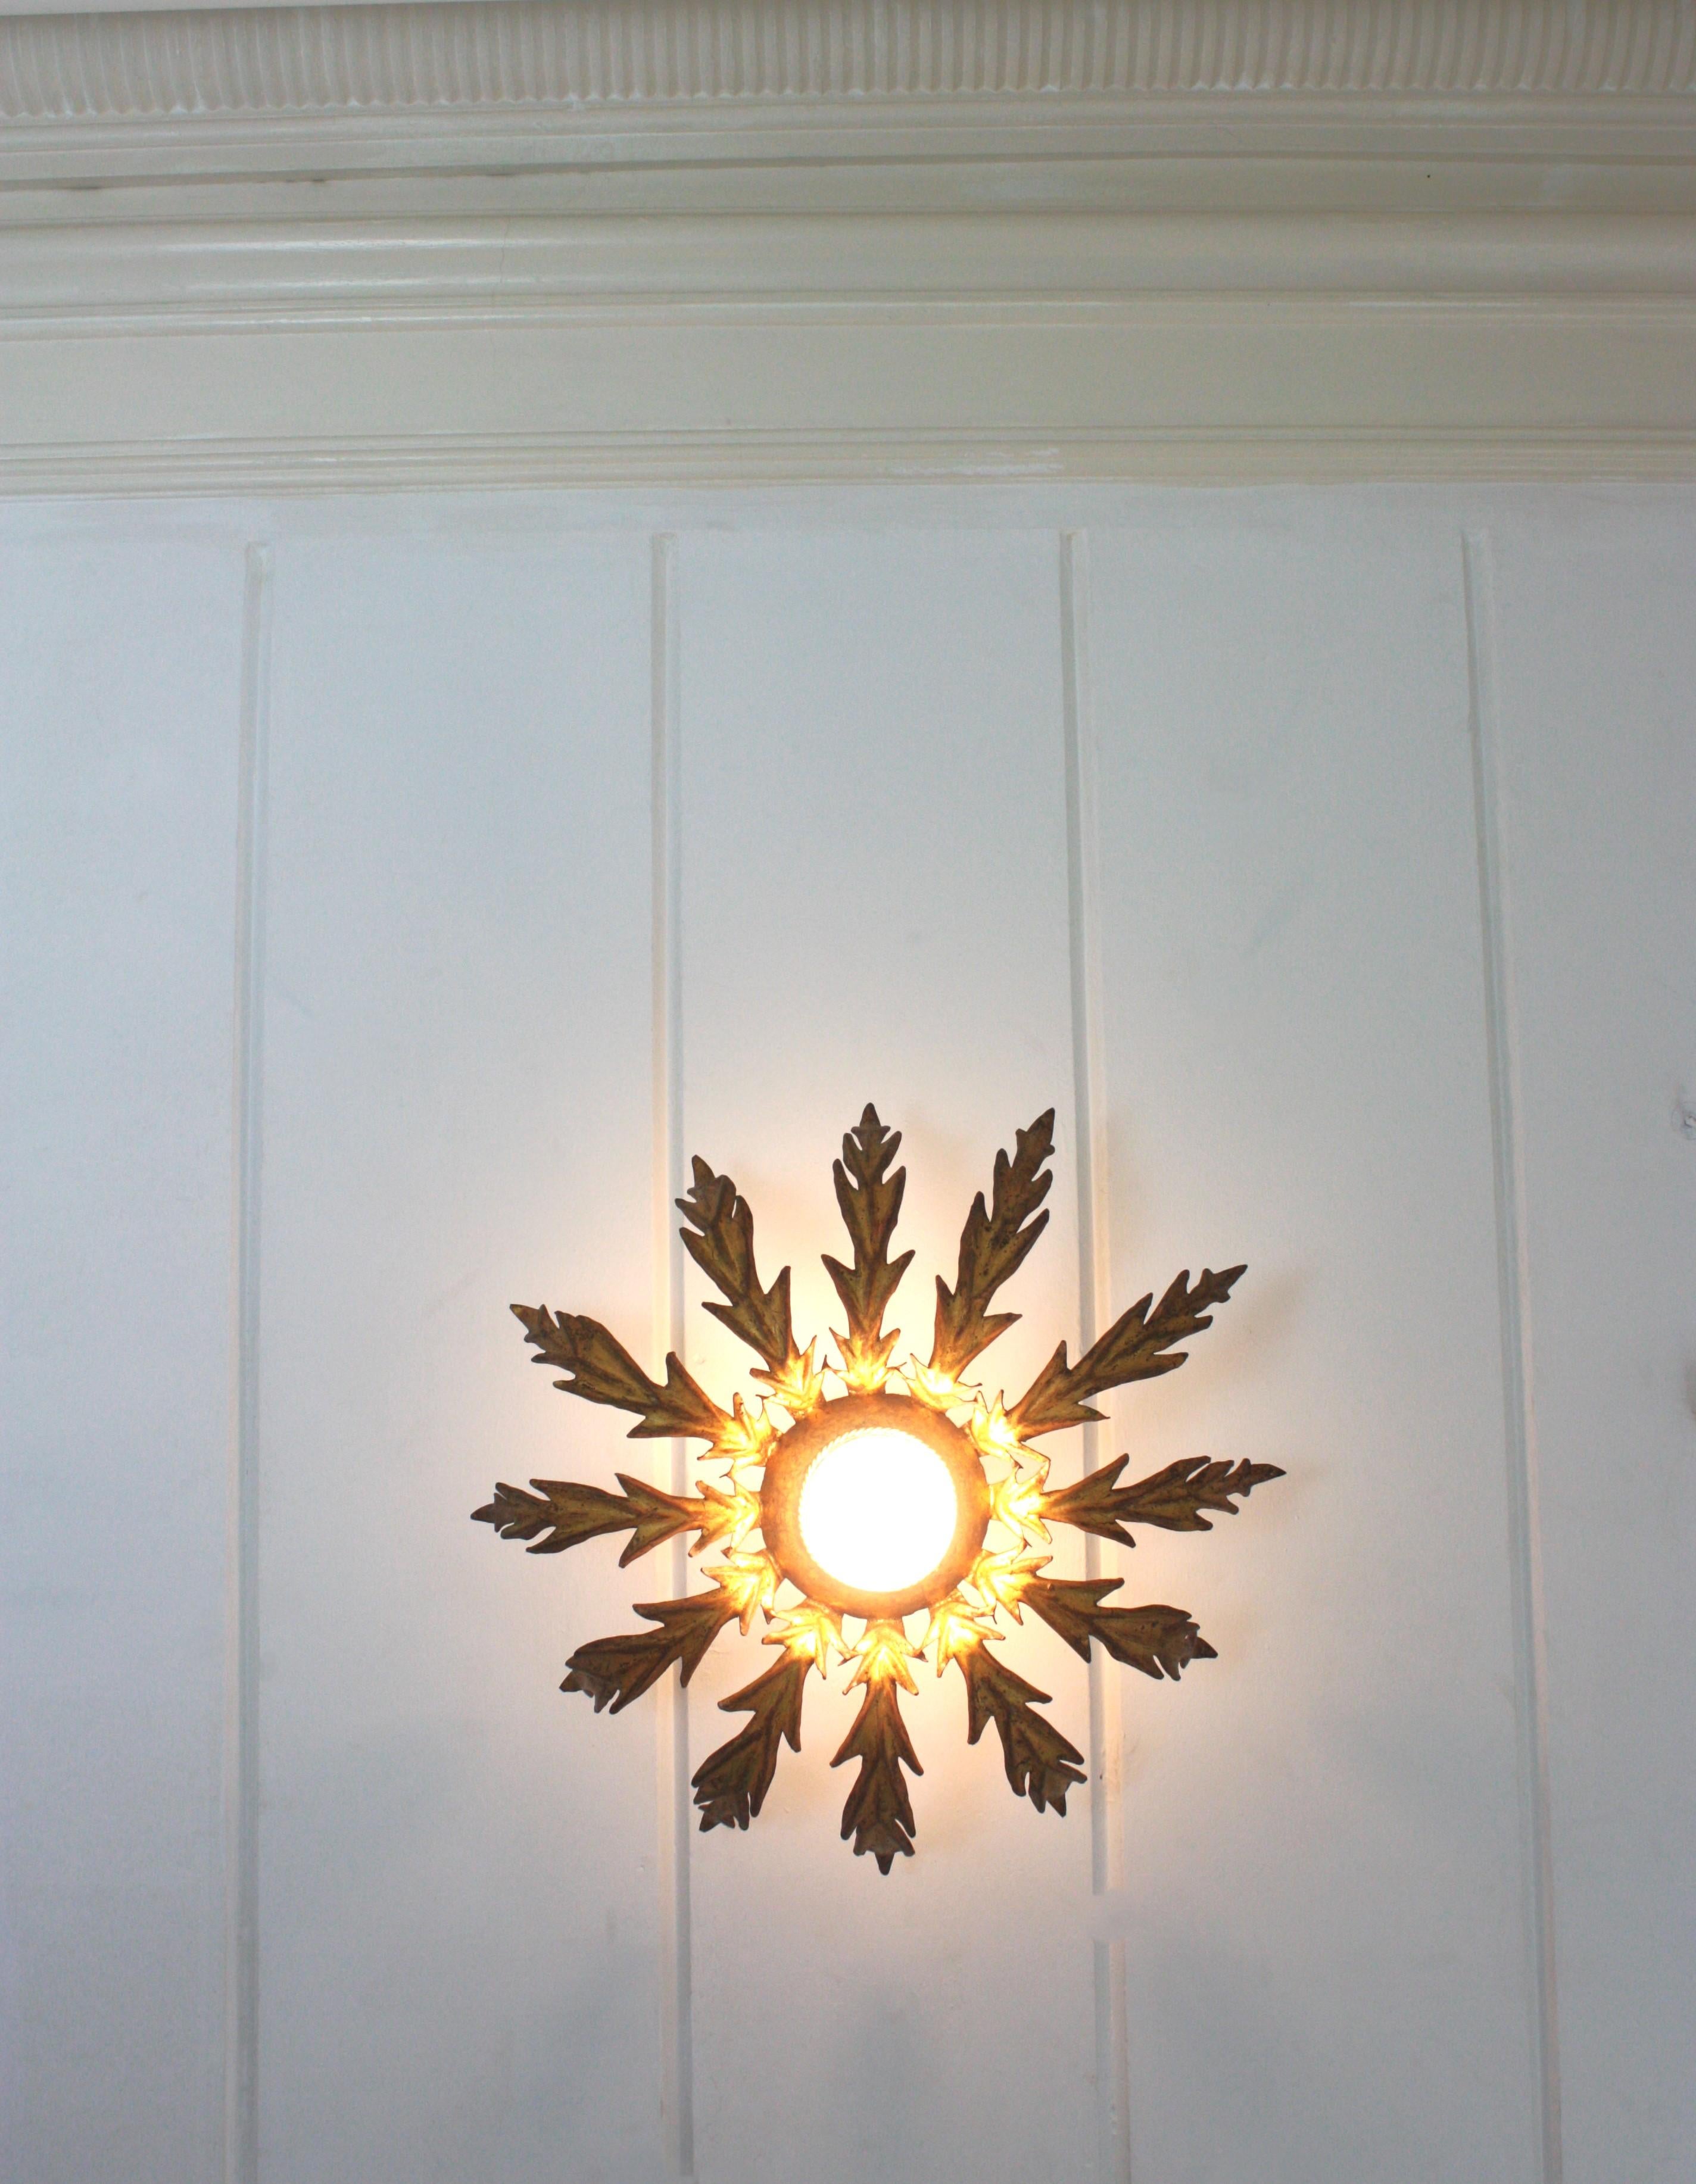 French Sunburst Leafed Ceiling Light Fixture in Gilt Iron, 1940s For Sale 5